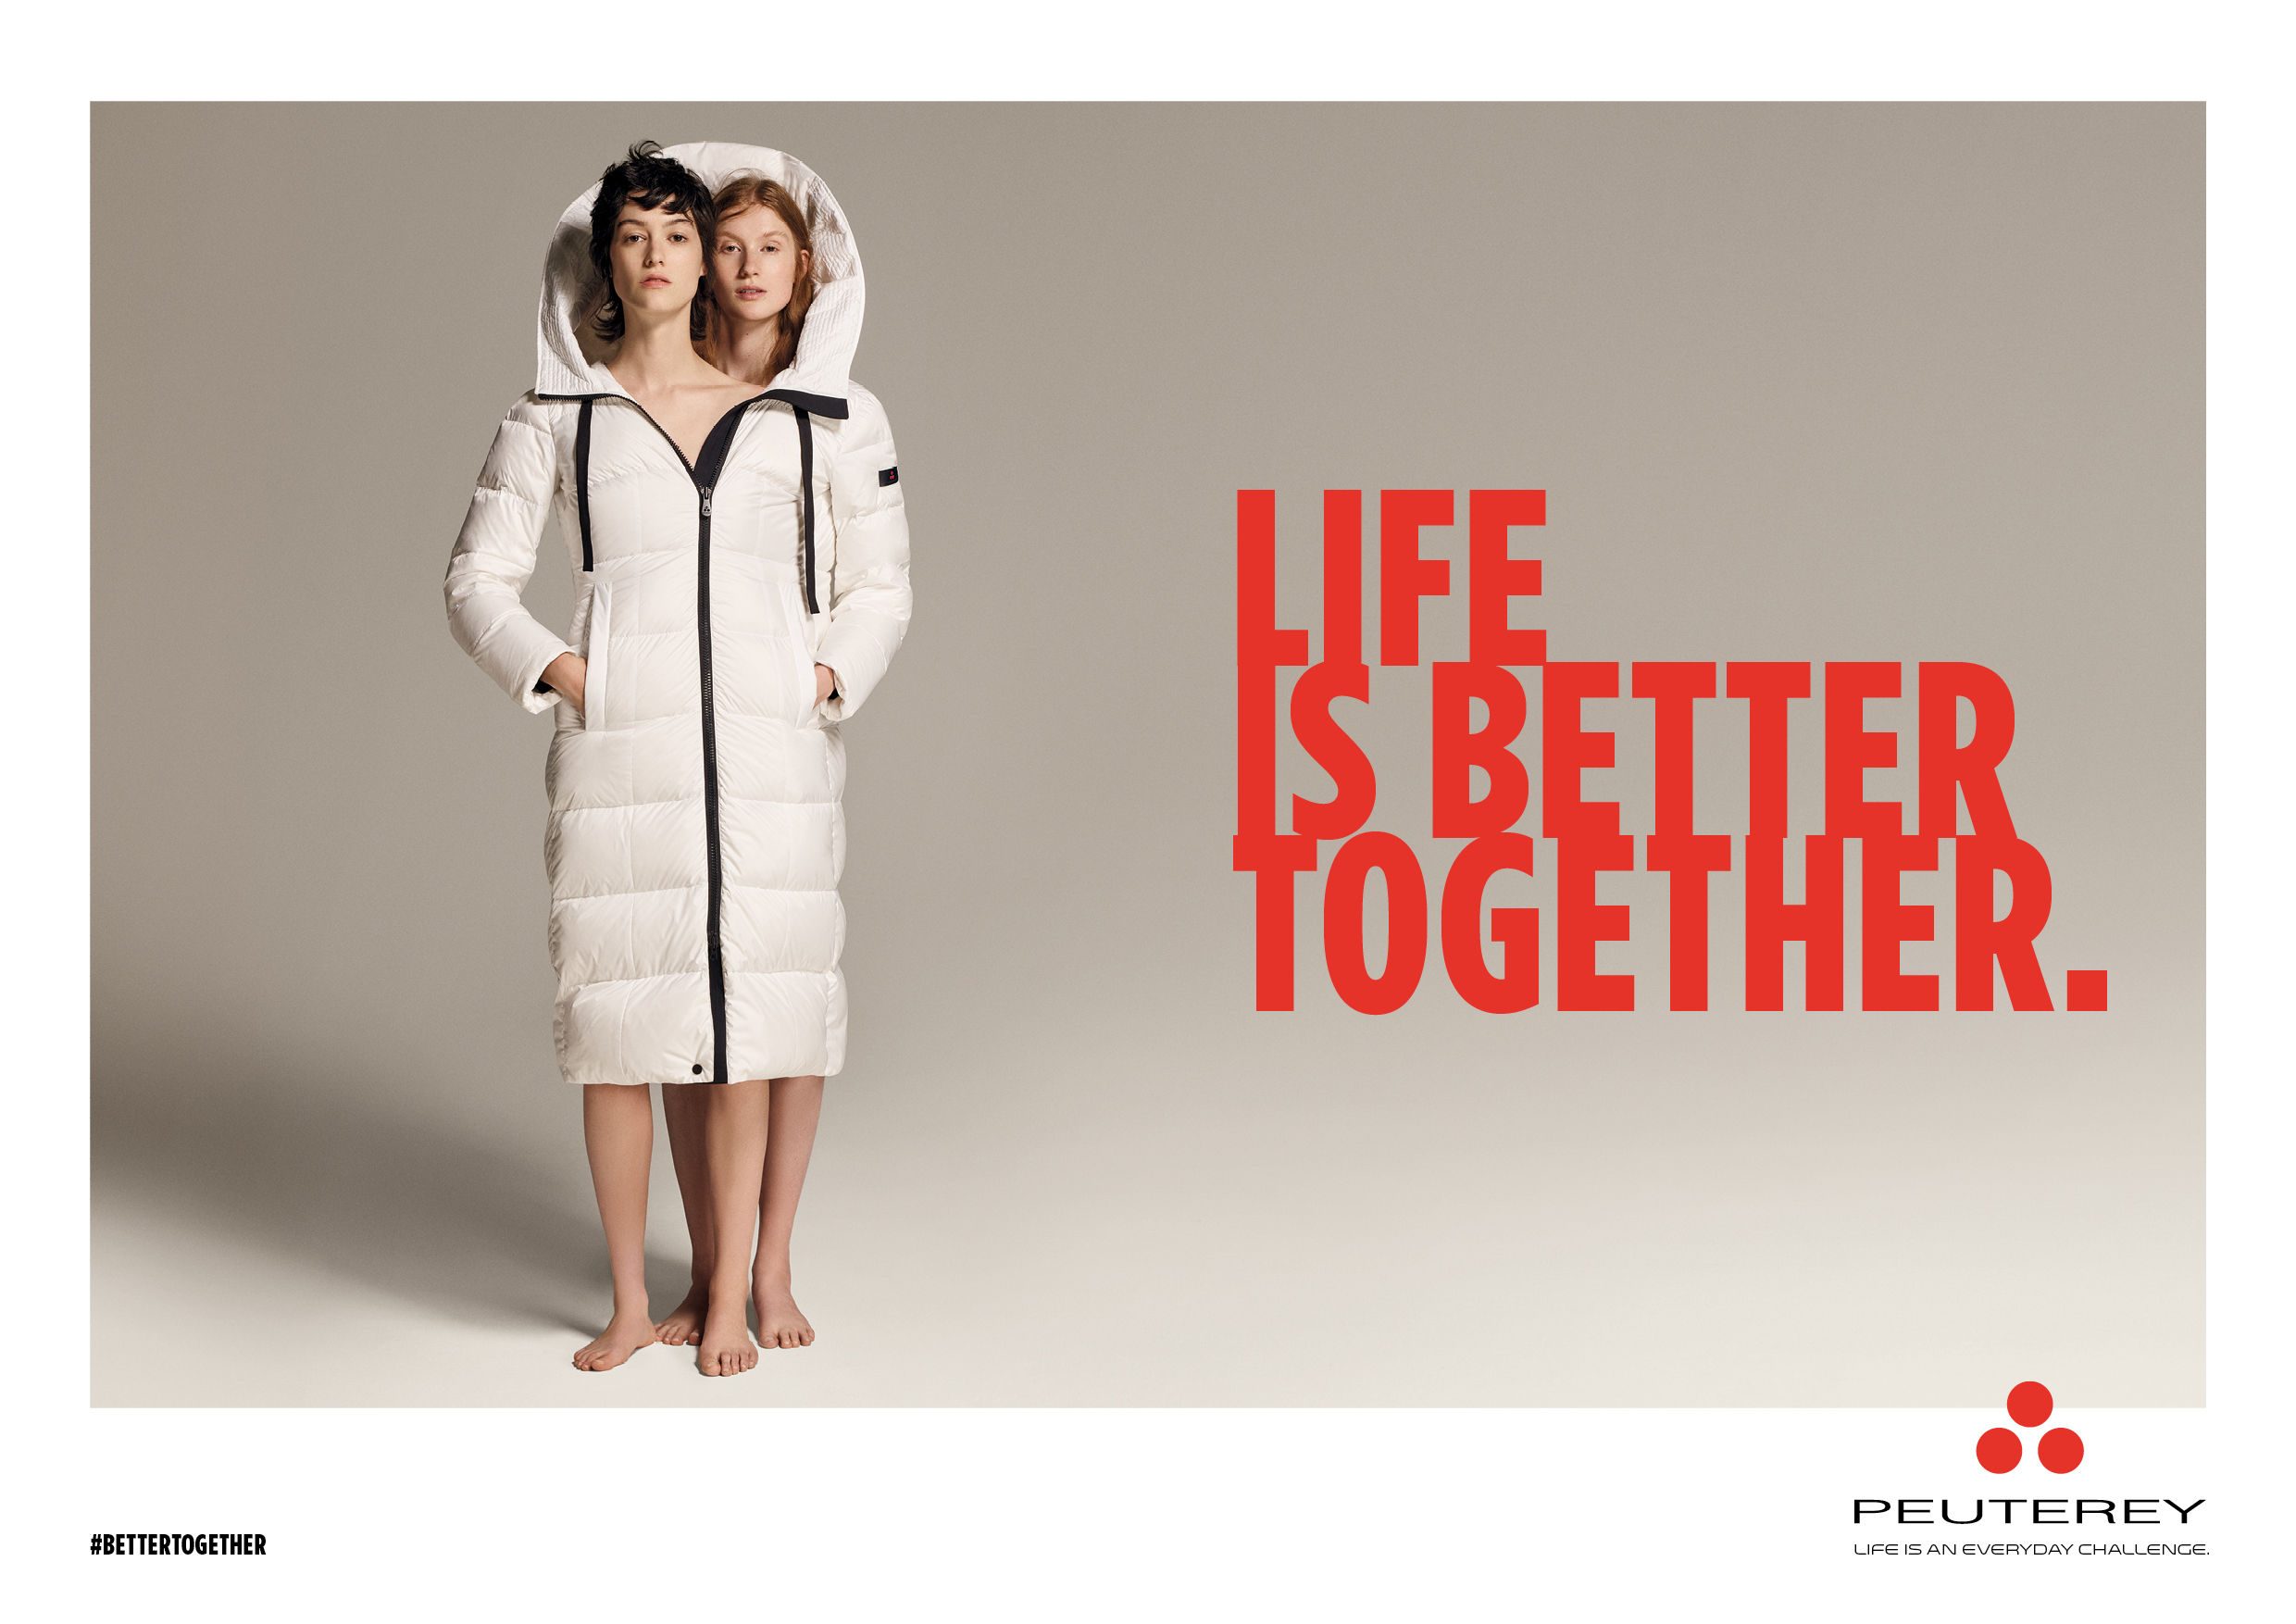 Peuterey launches its Fall Winter 2021/22 Collection   with the campaign “life is better together” created by Armando Testa